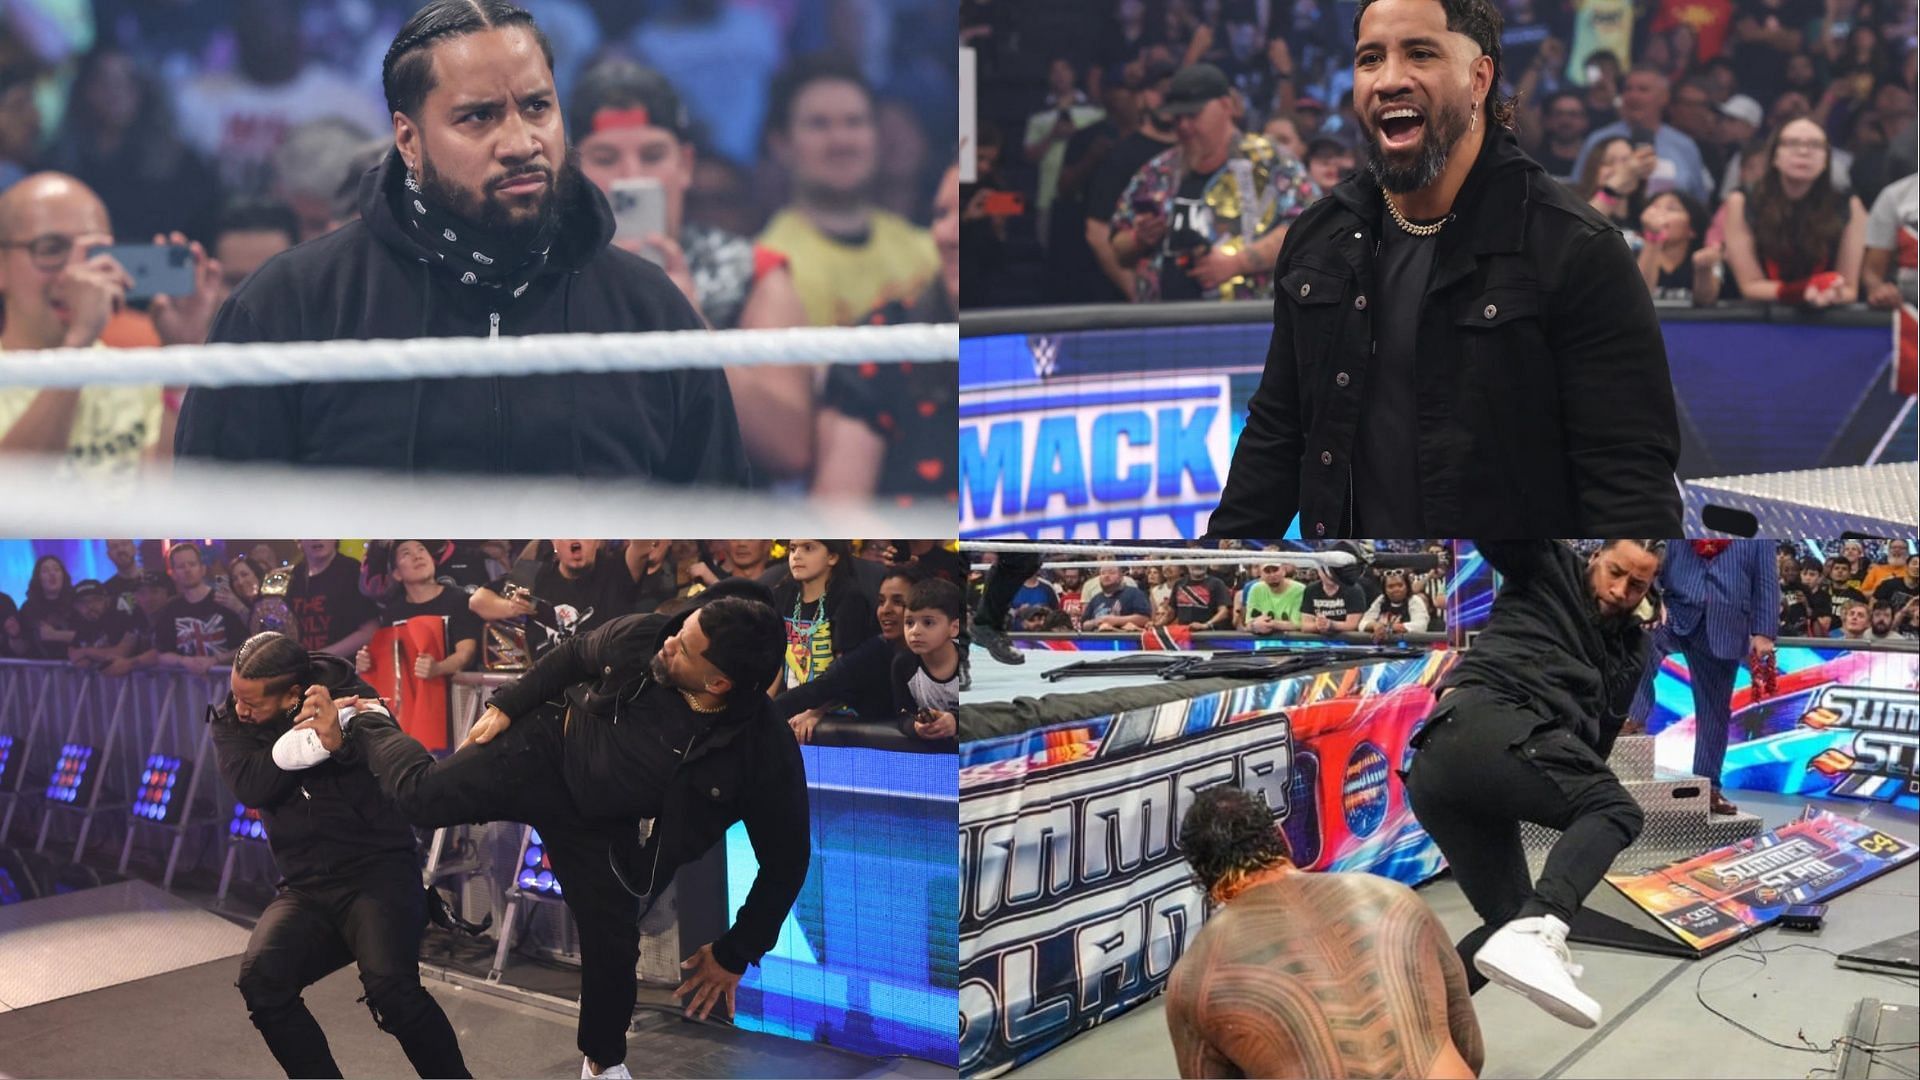 The Usos have bad blood between them.